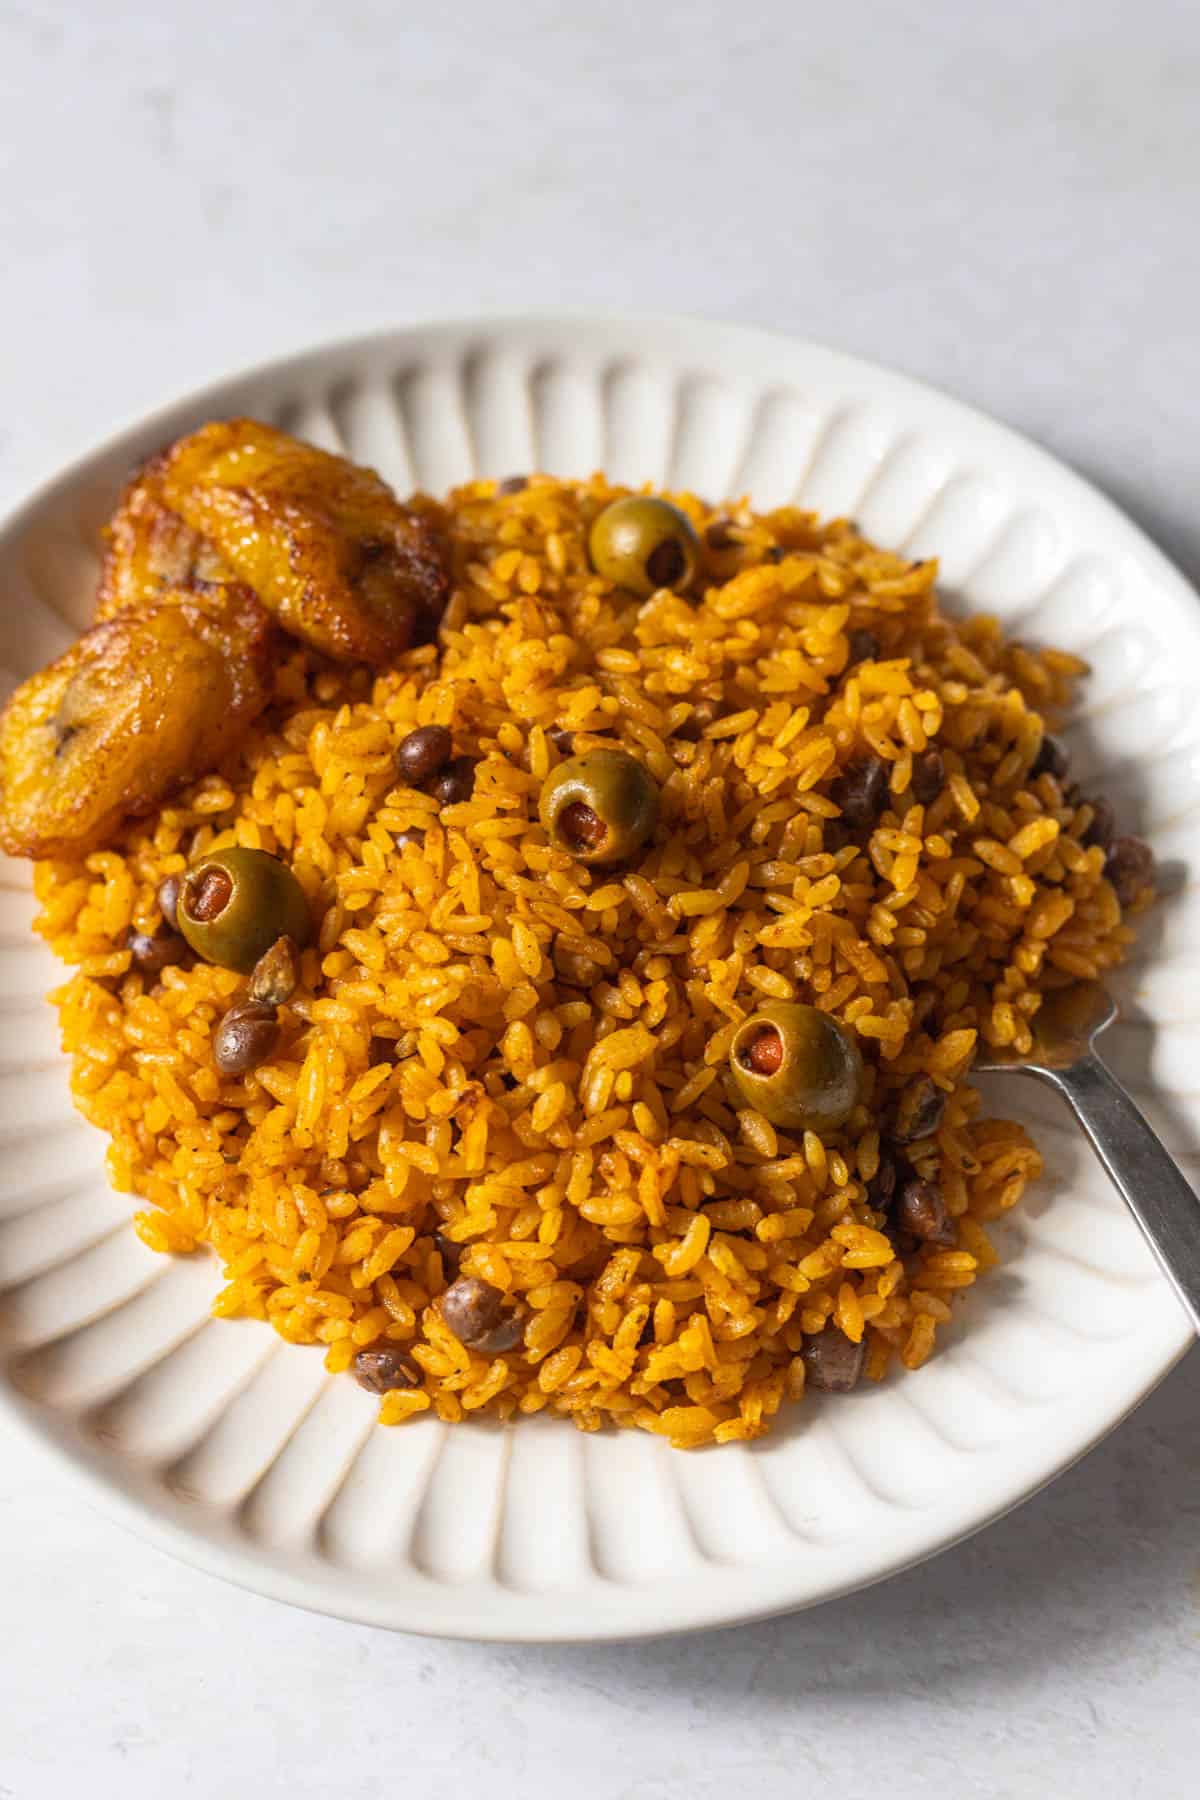 pigeon peas and rice (or arroz con gandules) on a white plate shown with green olives, a fork and side of sweet plantains.